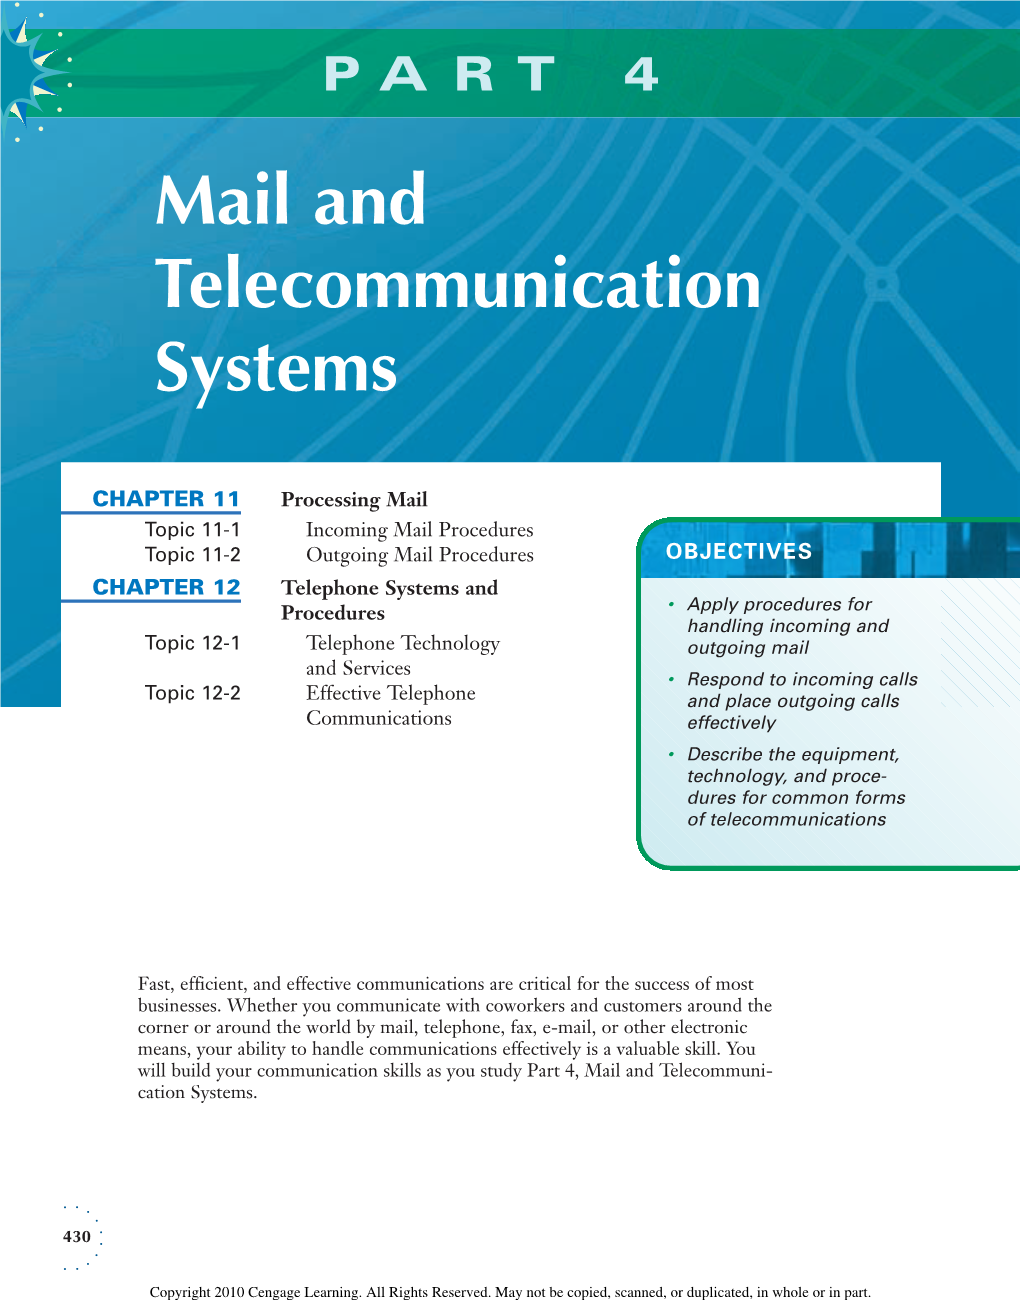 Mail and Telecommunication Systems